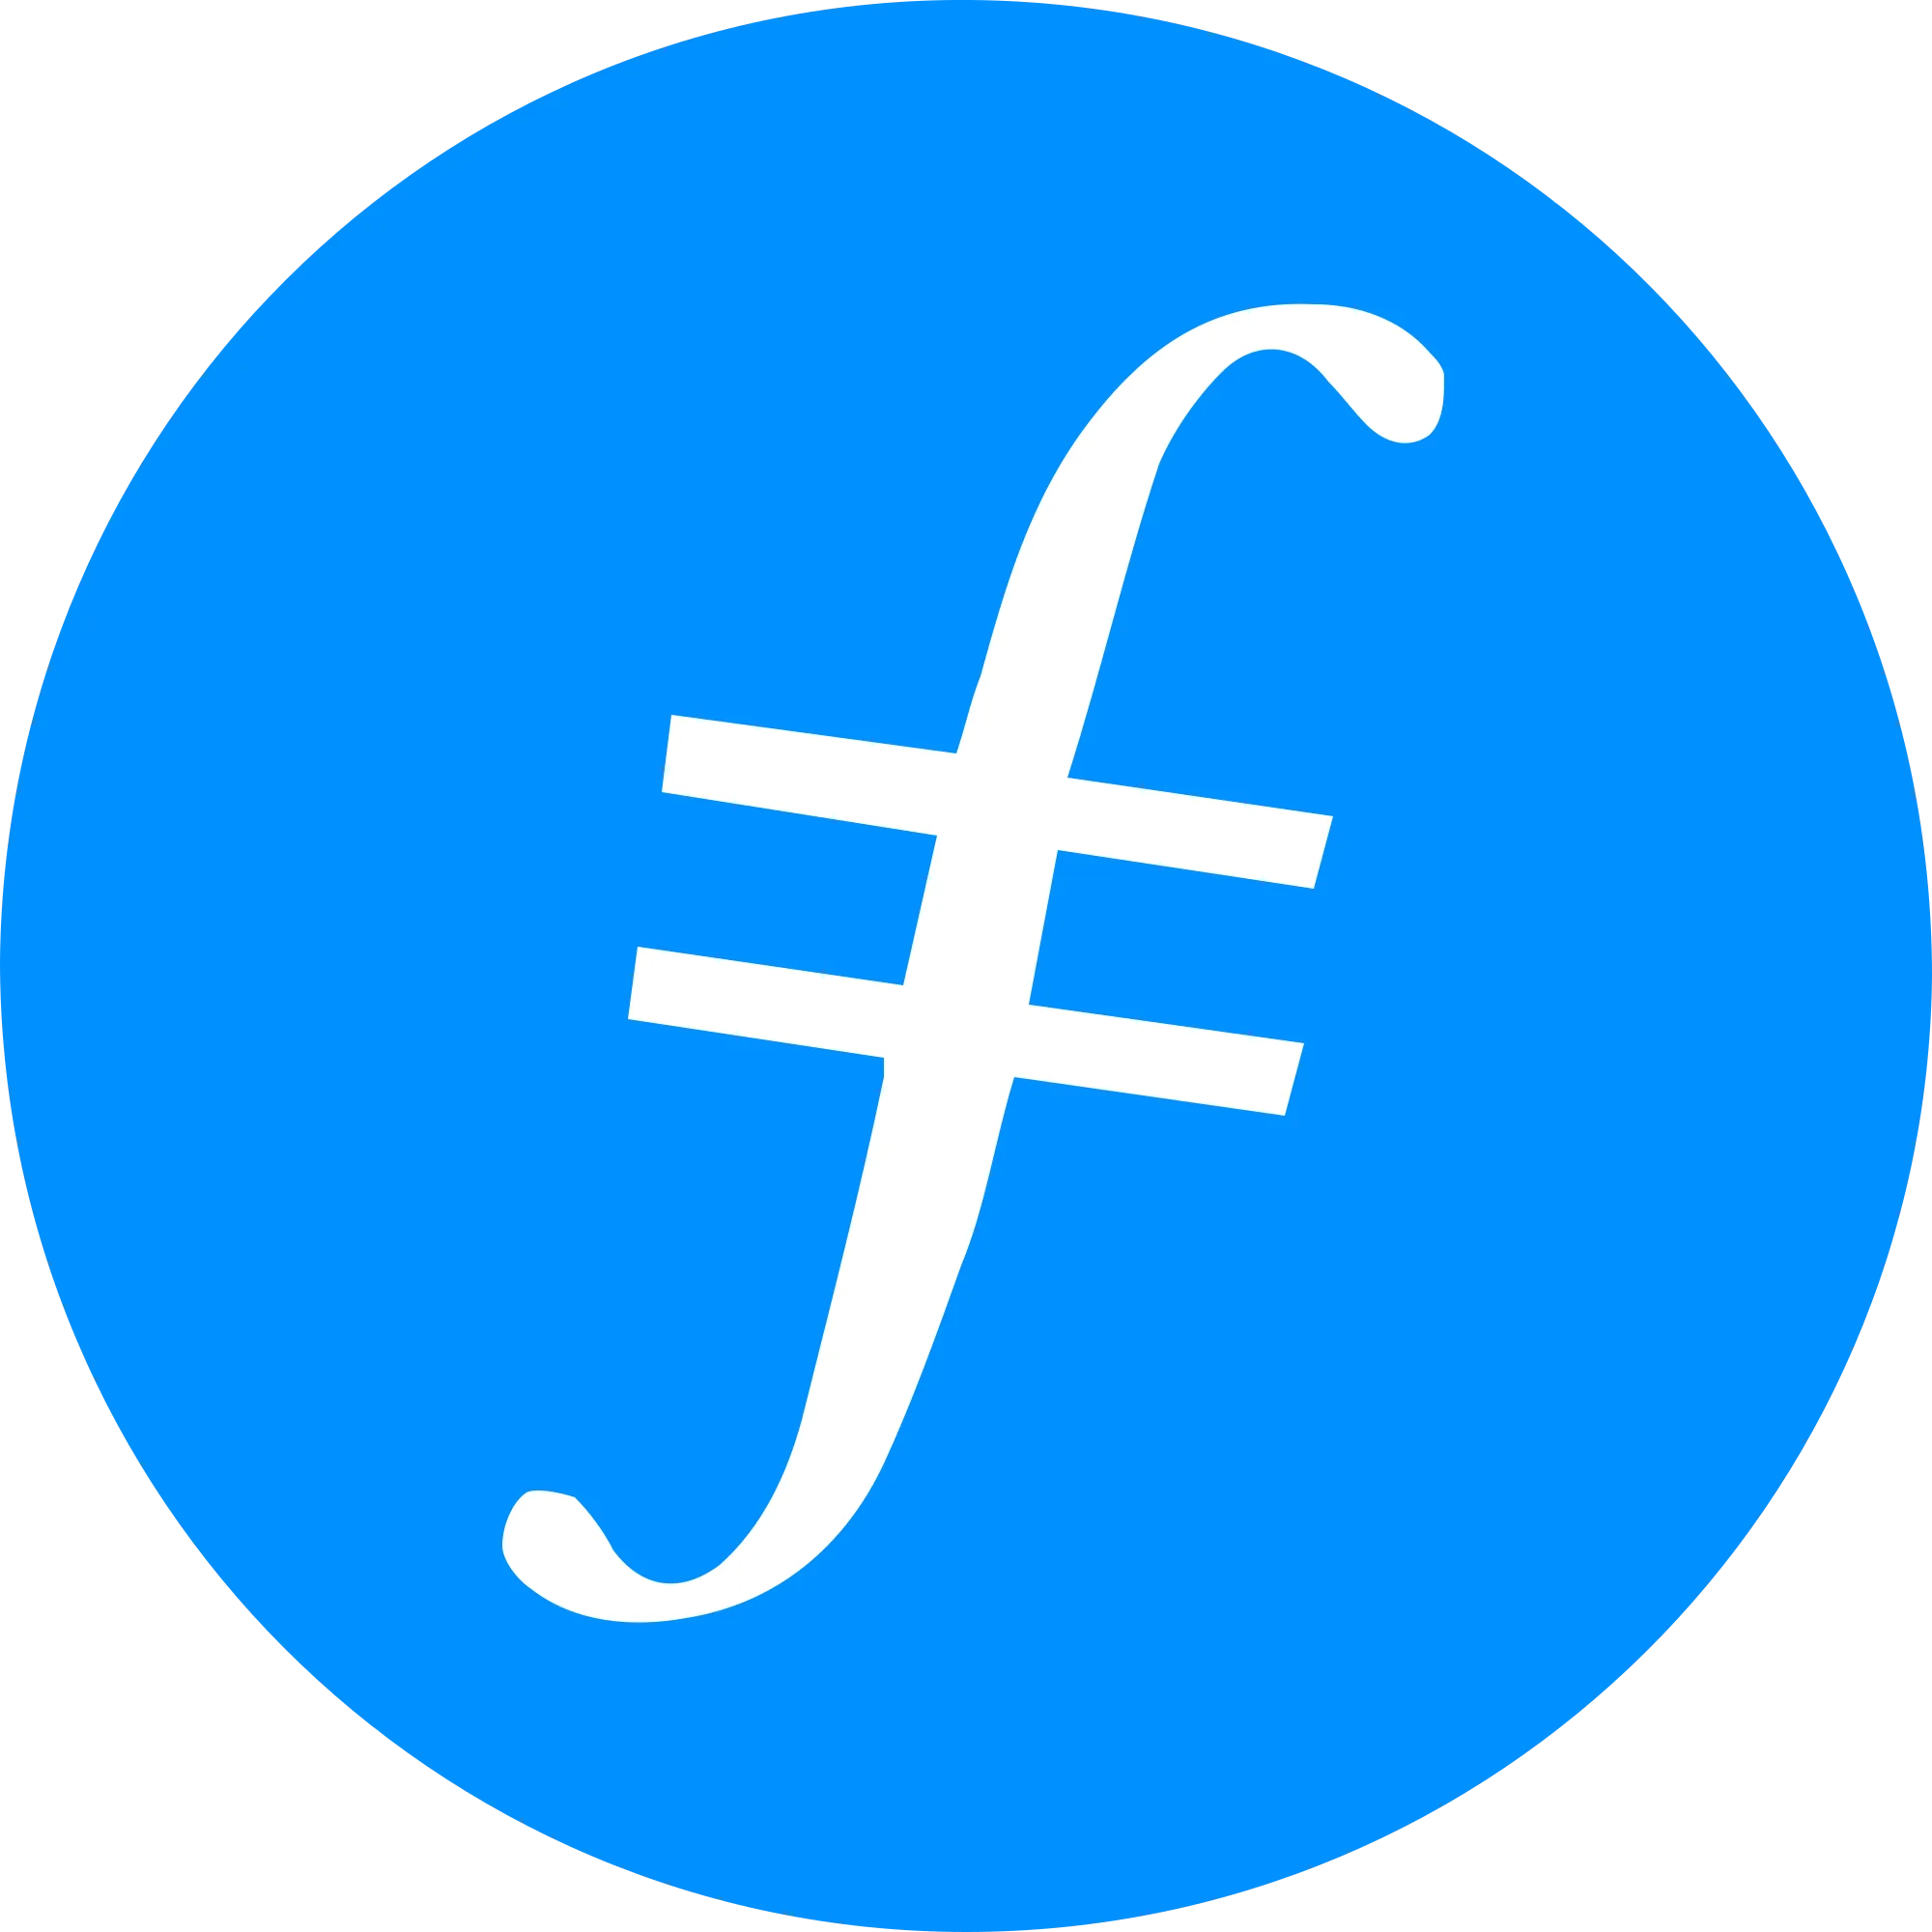 Filecoin logo in png format